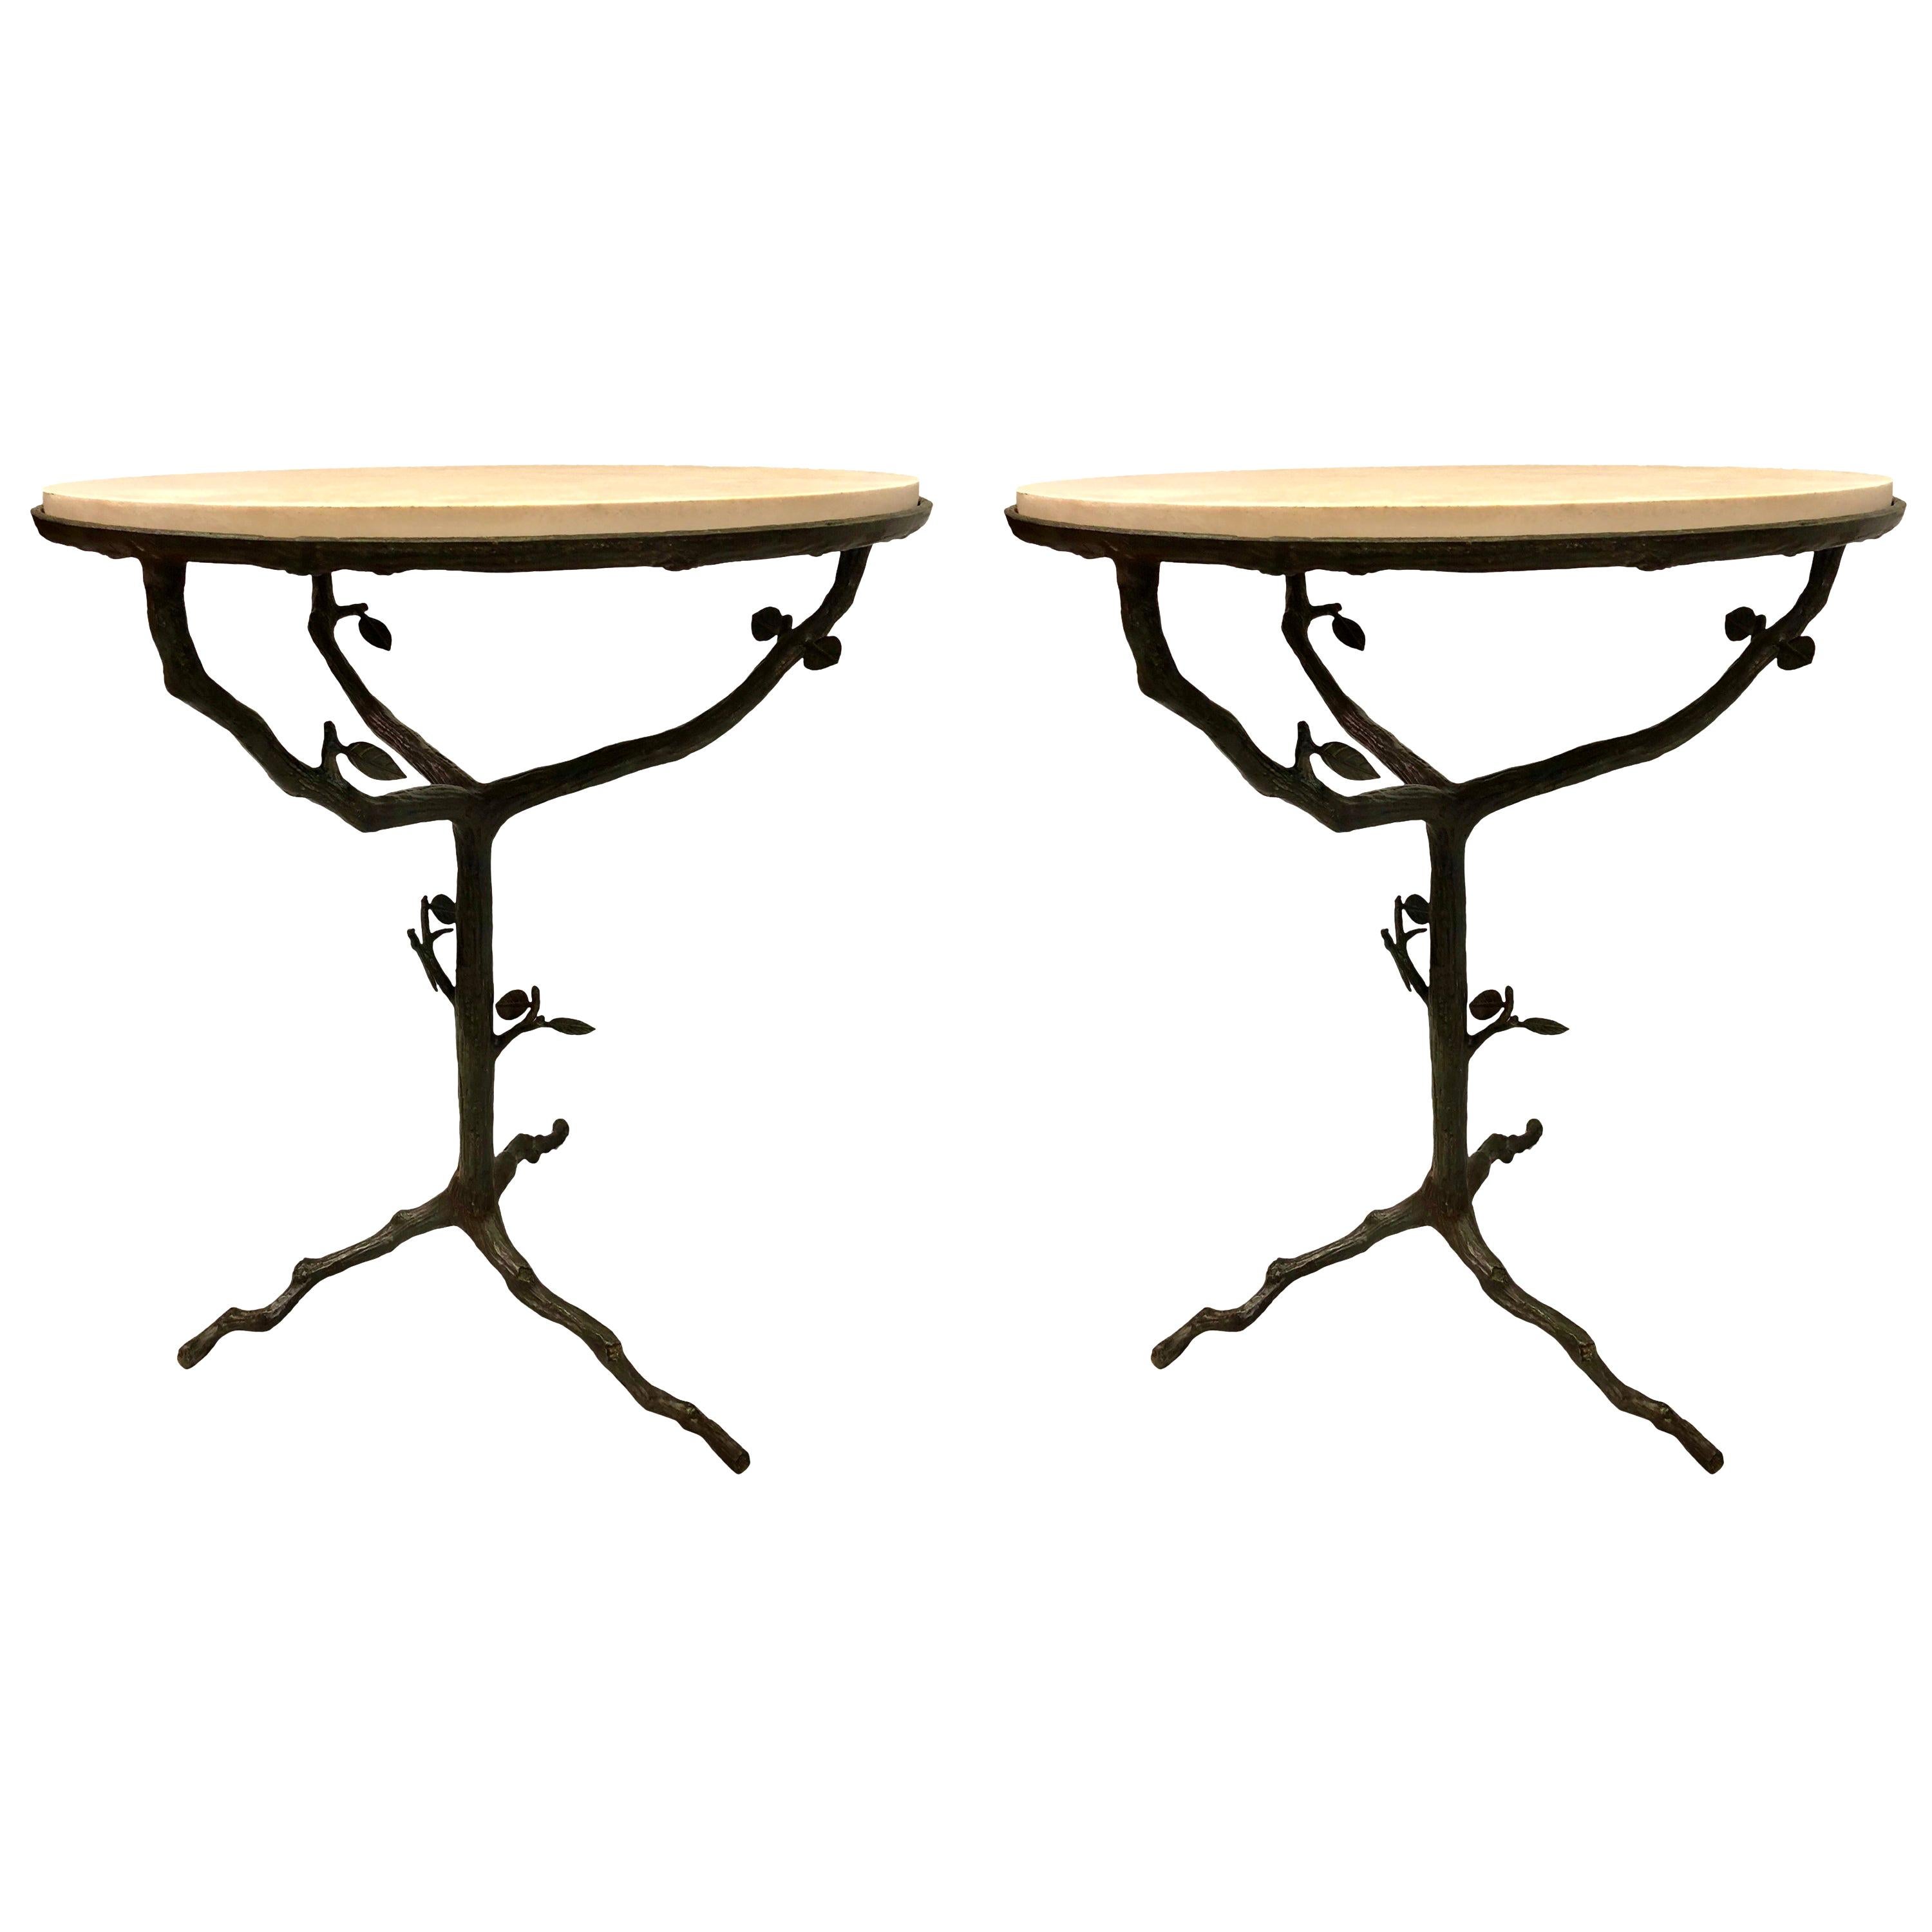 Pair French Mid Modern Bronze & Limestone End/Side Tables, style of Giacometti